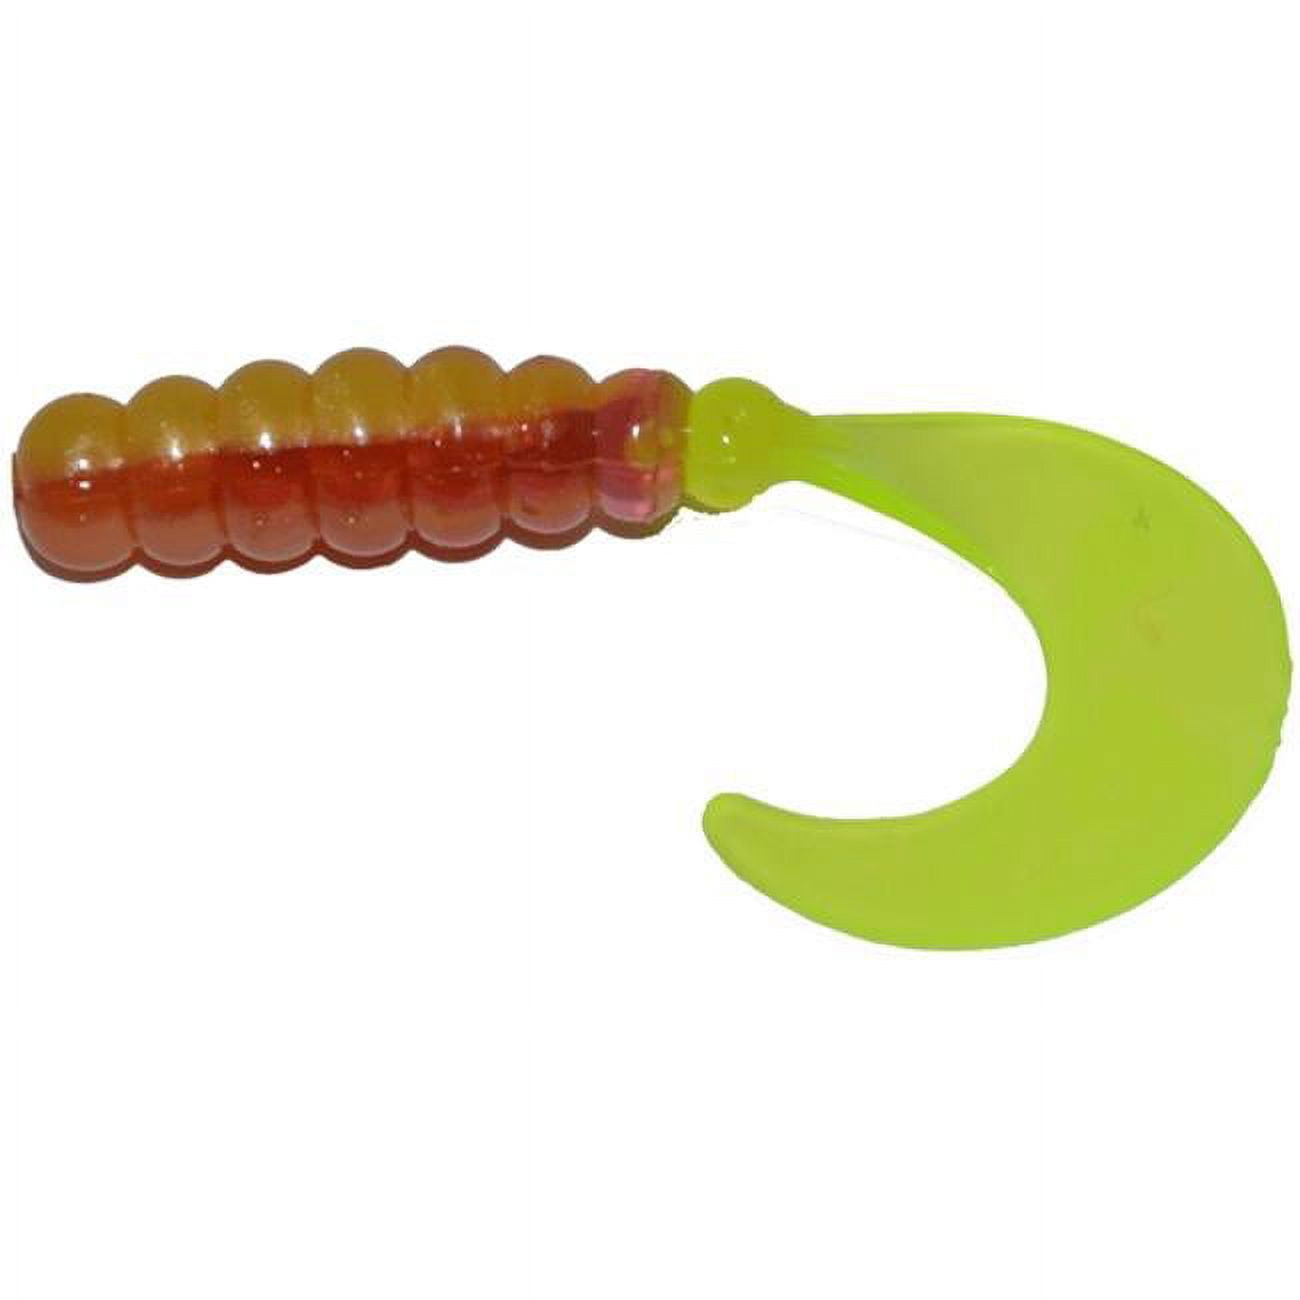 Big Bite Baits FG210 2 in. Fat Grub, Yellow Jacket - Pack of 10 